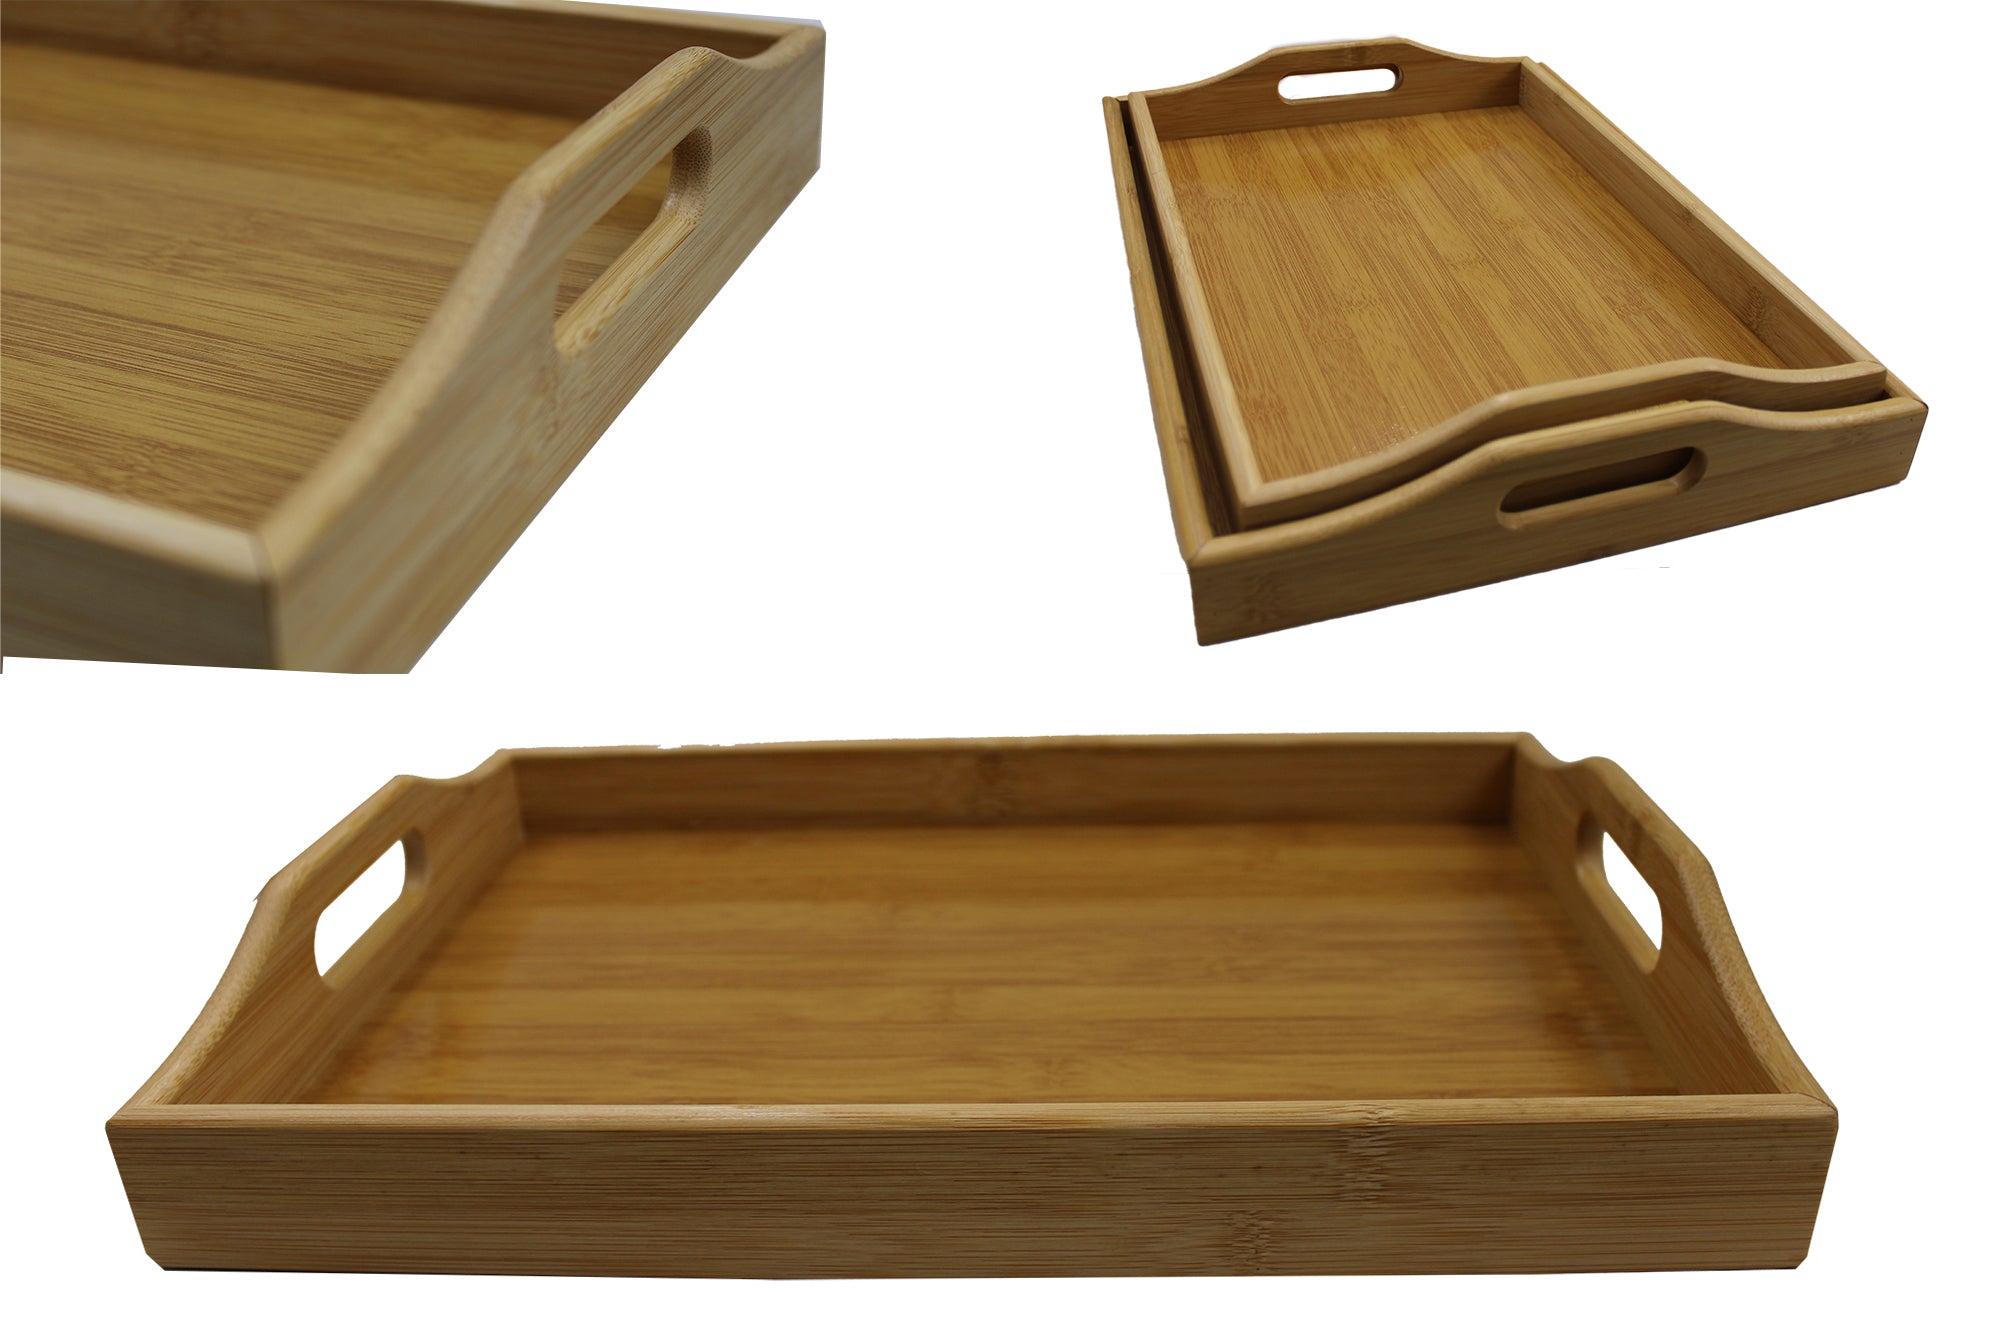 2 Piece Bamboo Serving Tray with  Handle Set - 39 x 29 and 36 x 26cm